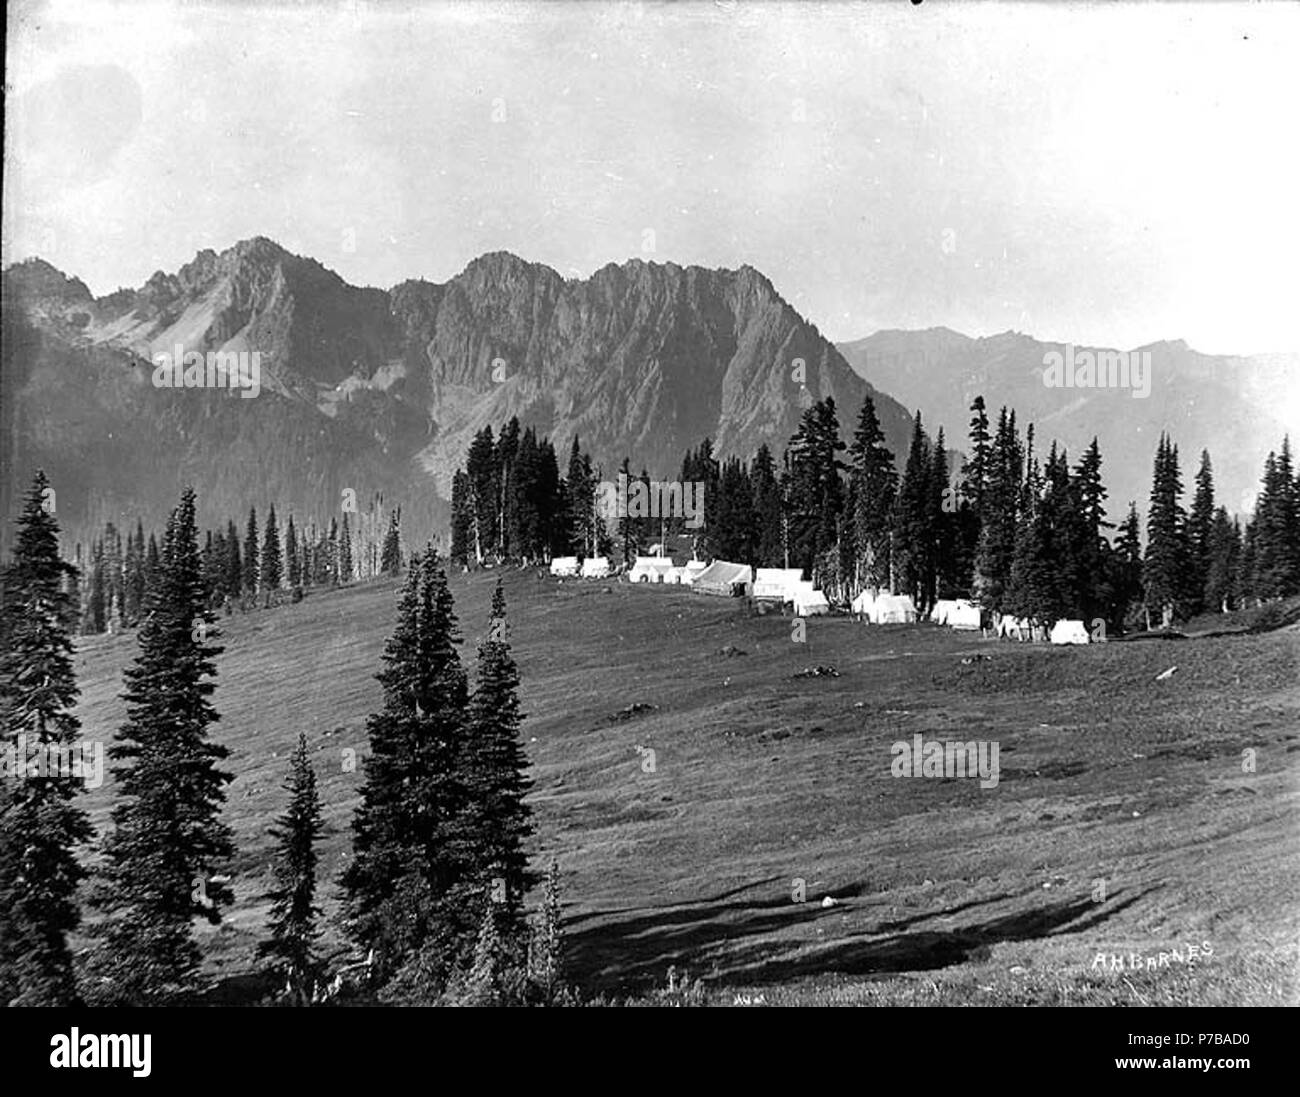 . English: John Reese's tent hotel camp known as Camp of the Clouds below Alta Vista, upper Paradise Valley, Mount Rainier National Park, Washington, 1905. English: On sleeve of negative: Paradise. Reeses camp in 1905 Subjects (LCTGM): Tents--Washington (State)--Mount Rainier National Park; Valleys--Washington (State) Subjects (LCSH): Camp sites, facilities, etc.--Washington (State)--Mount Rainier National Park; Camp of the Clouds (Wash.); Paradise Valley (Lewis County and Pierce County, Wash.); Mount RainierCamp of the Clouds National Park (Wash.)  . 1905 47 John Reese's tent hotel camp known Stock Photo